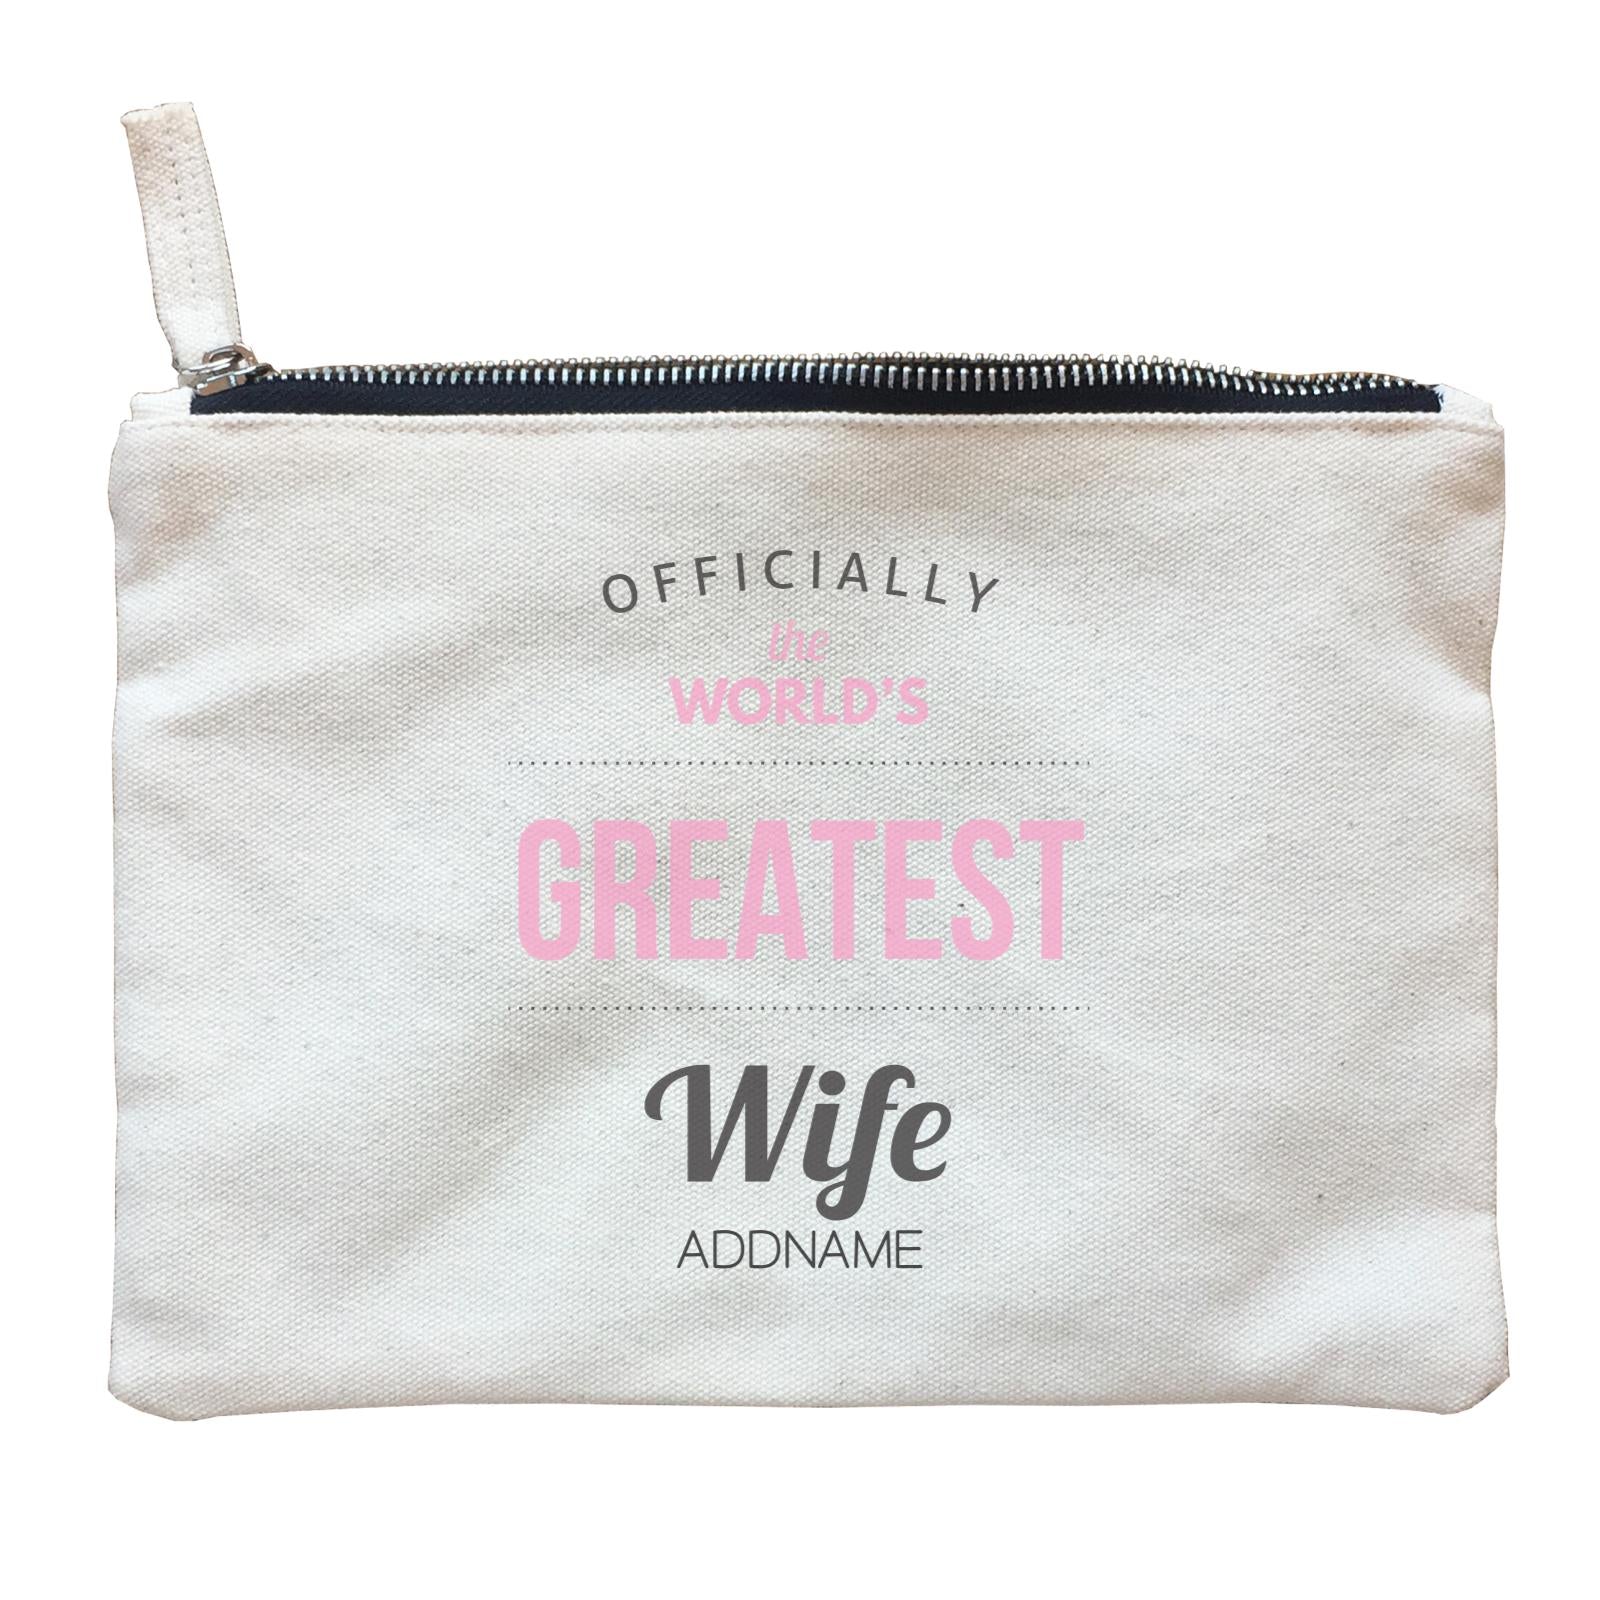 Husband and Wife Officially The World's Geatest Wife Addname Zipper Pouch